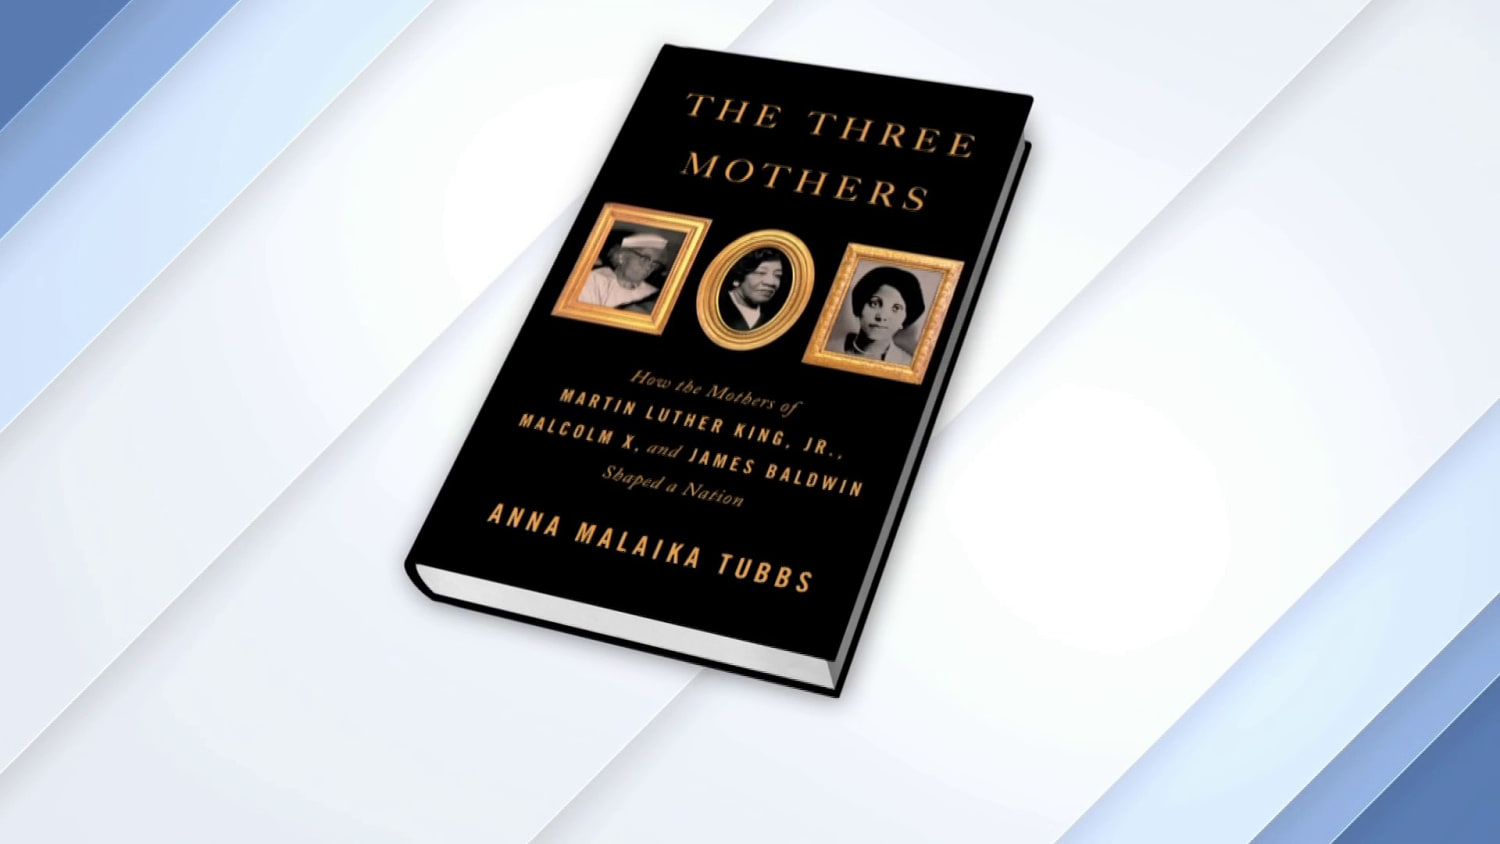 The Three Mothers: How the Mothers of Martin Luther King, Jr., Malcolm X,  and James Baldwin Shaped a Nation